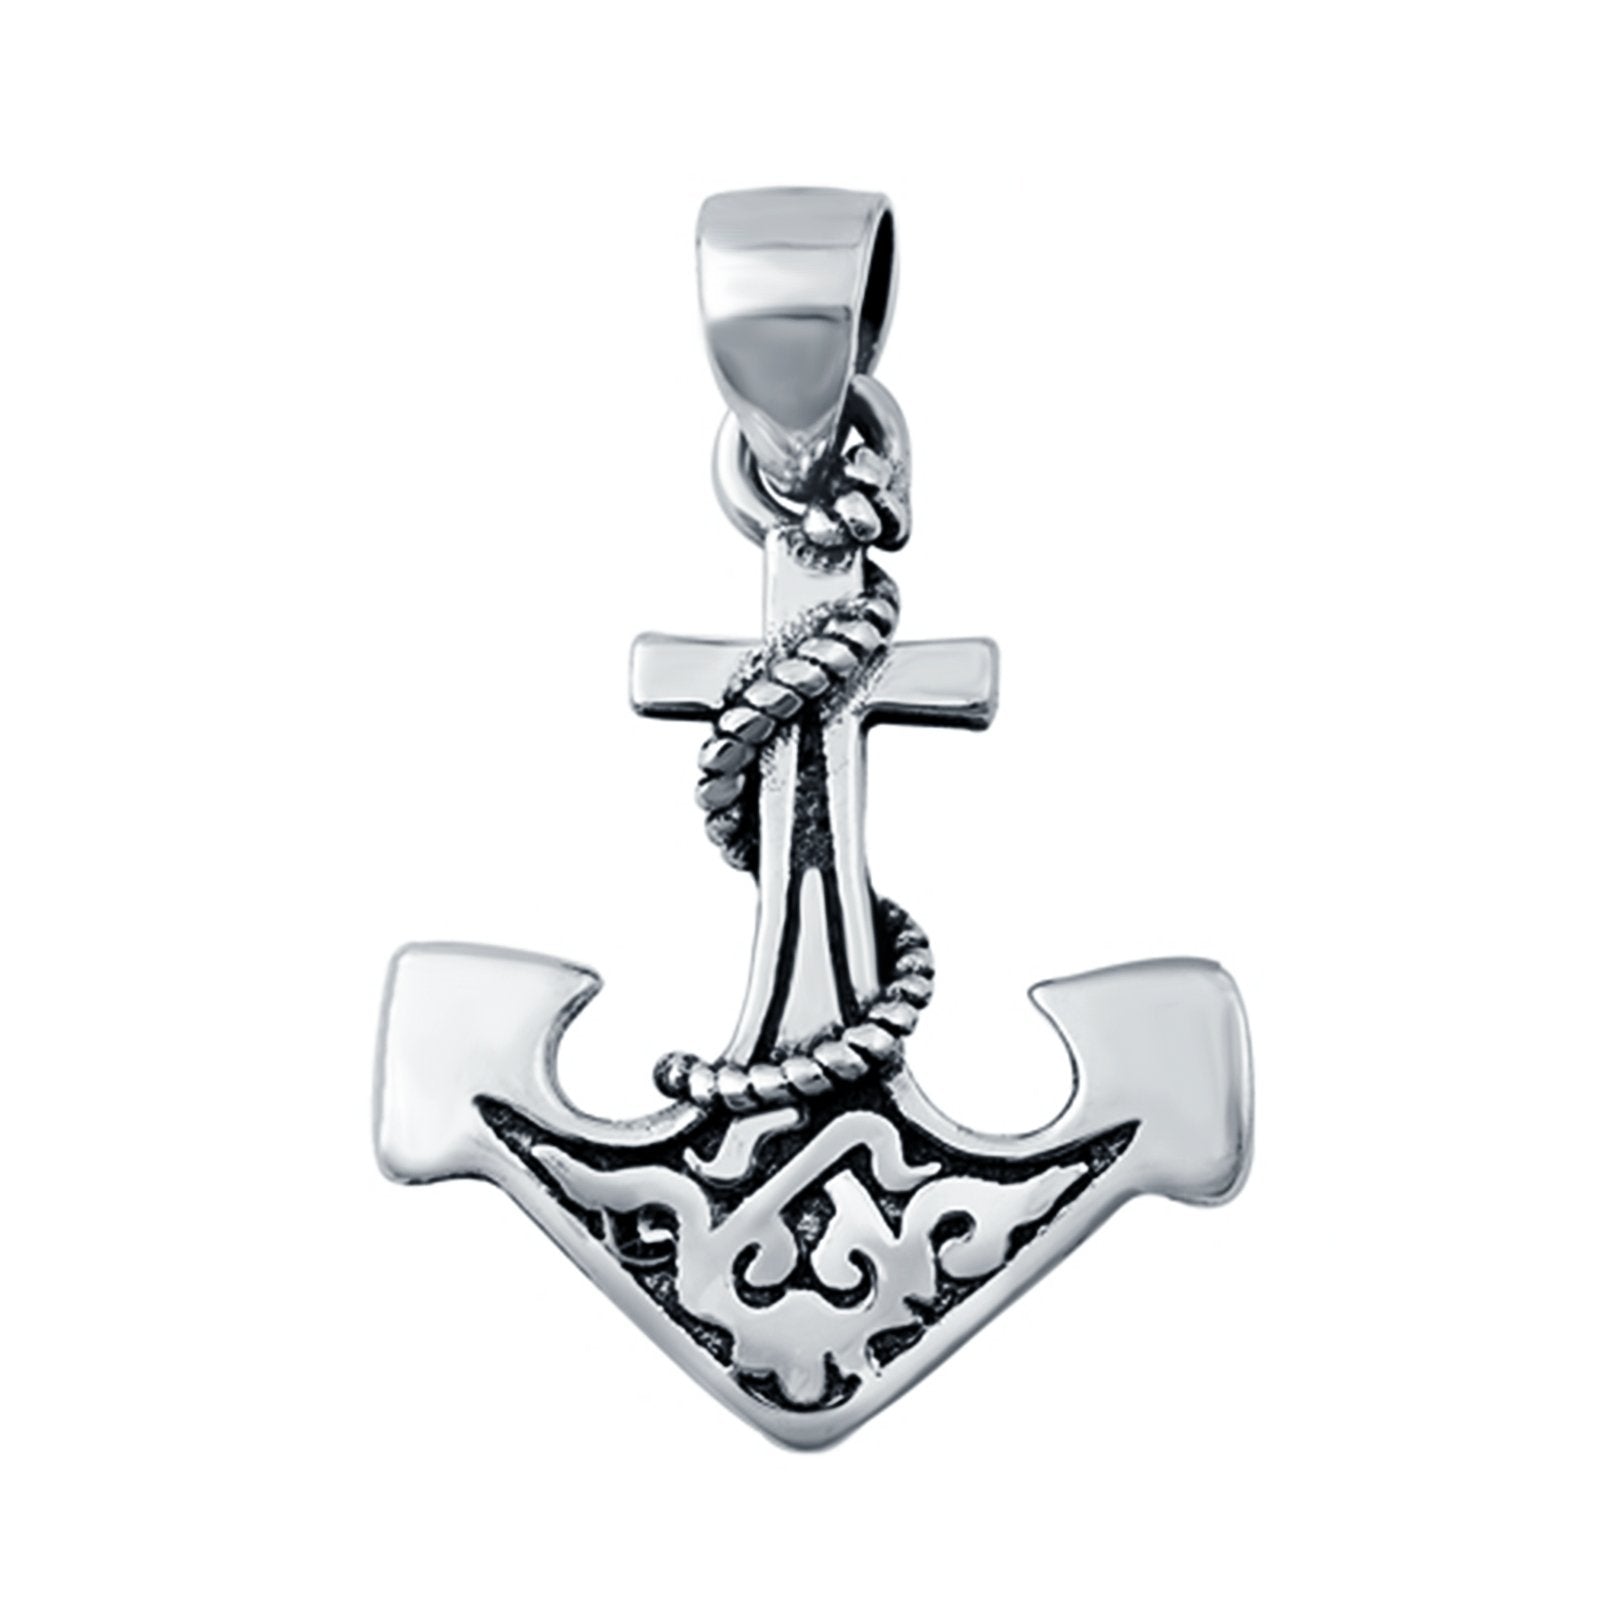 Anchor Charm Vintage Navy Mooring Rope Plain Pendants 925 Sterling Silver